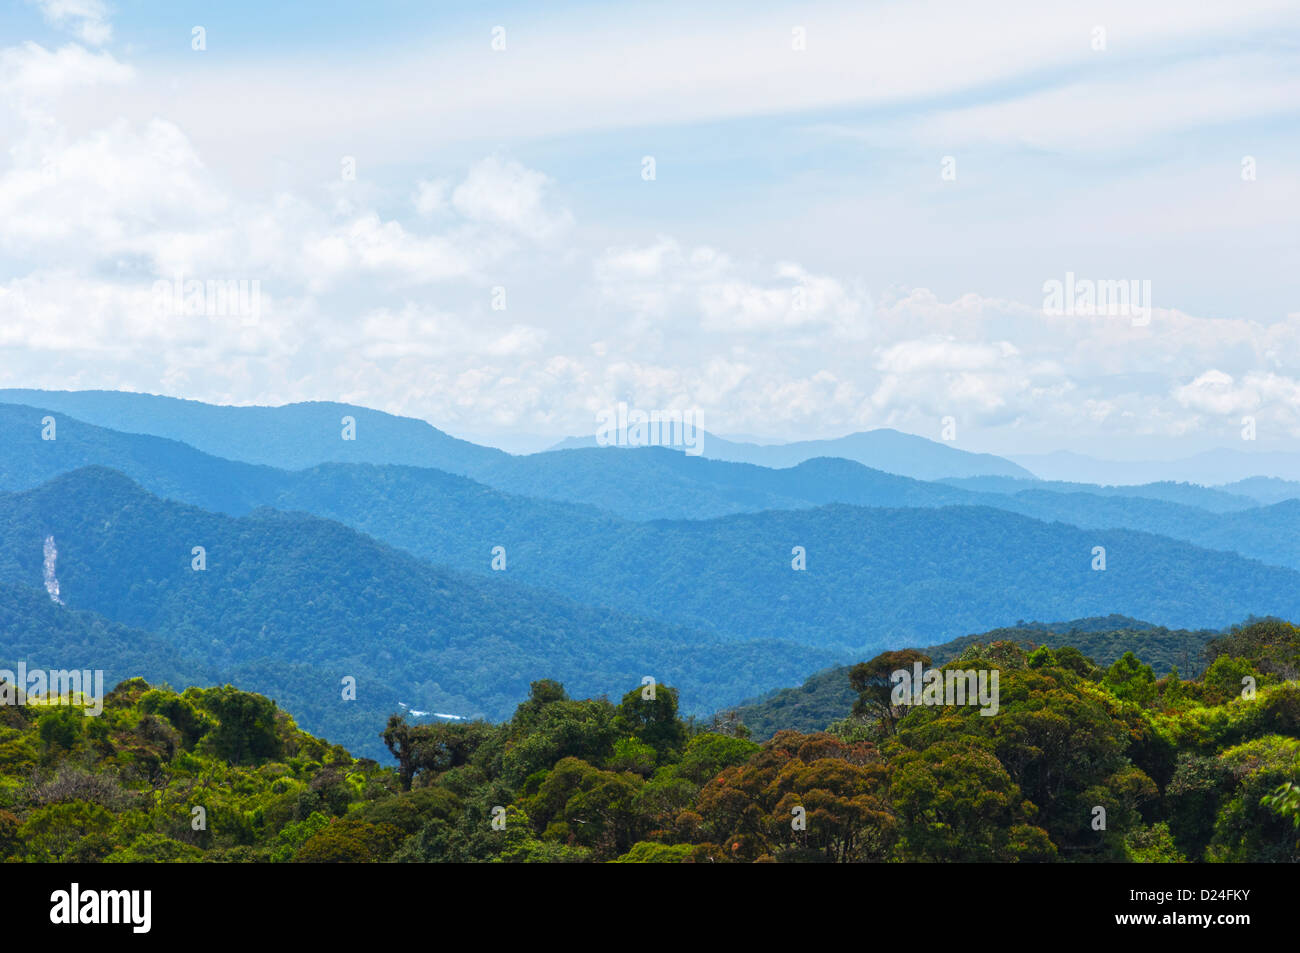 A view of nature with green forest nearby and layers of blue mountains at a distance Stock Photo